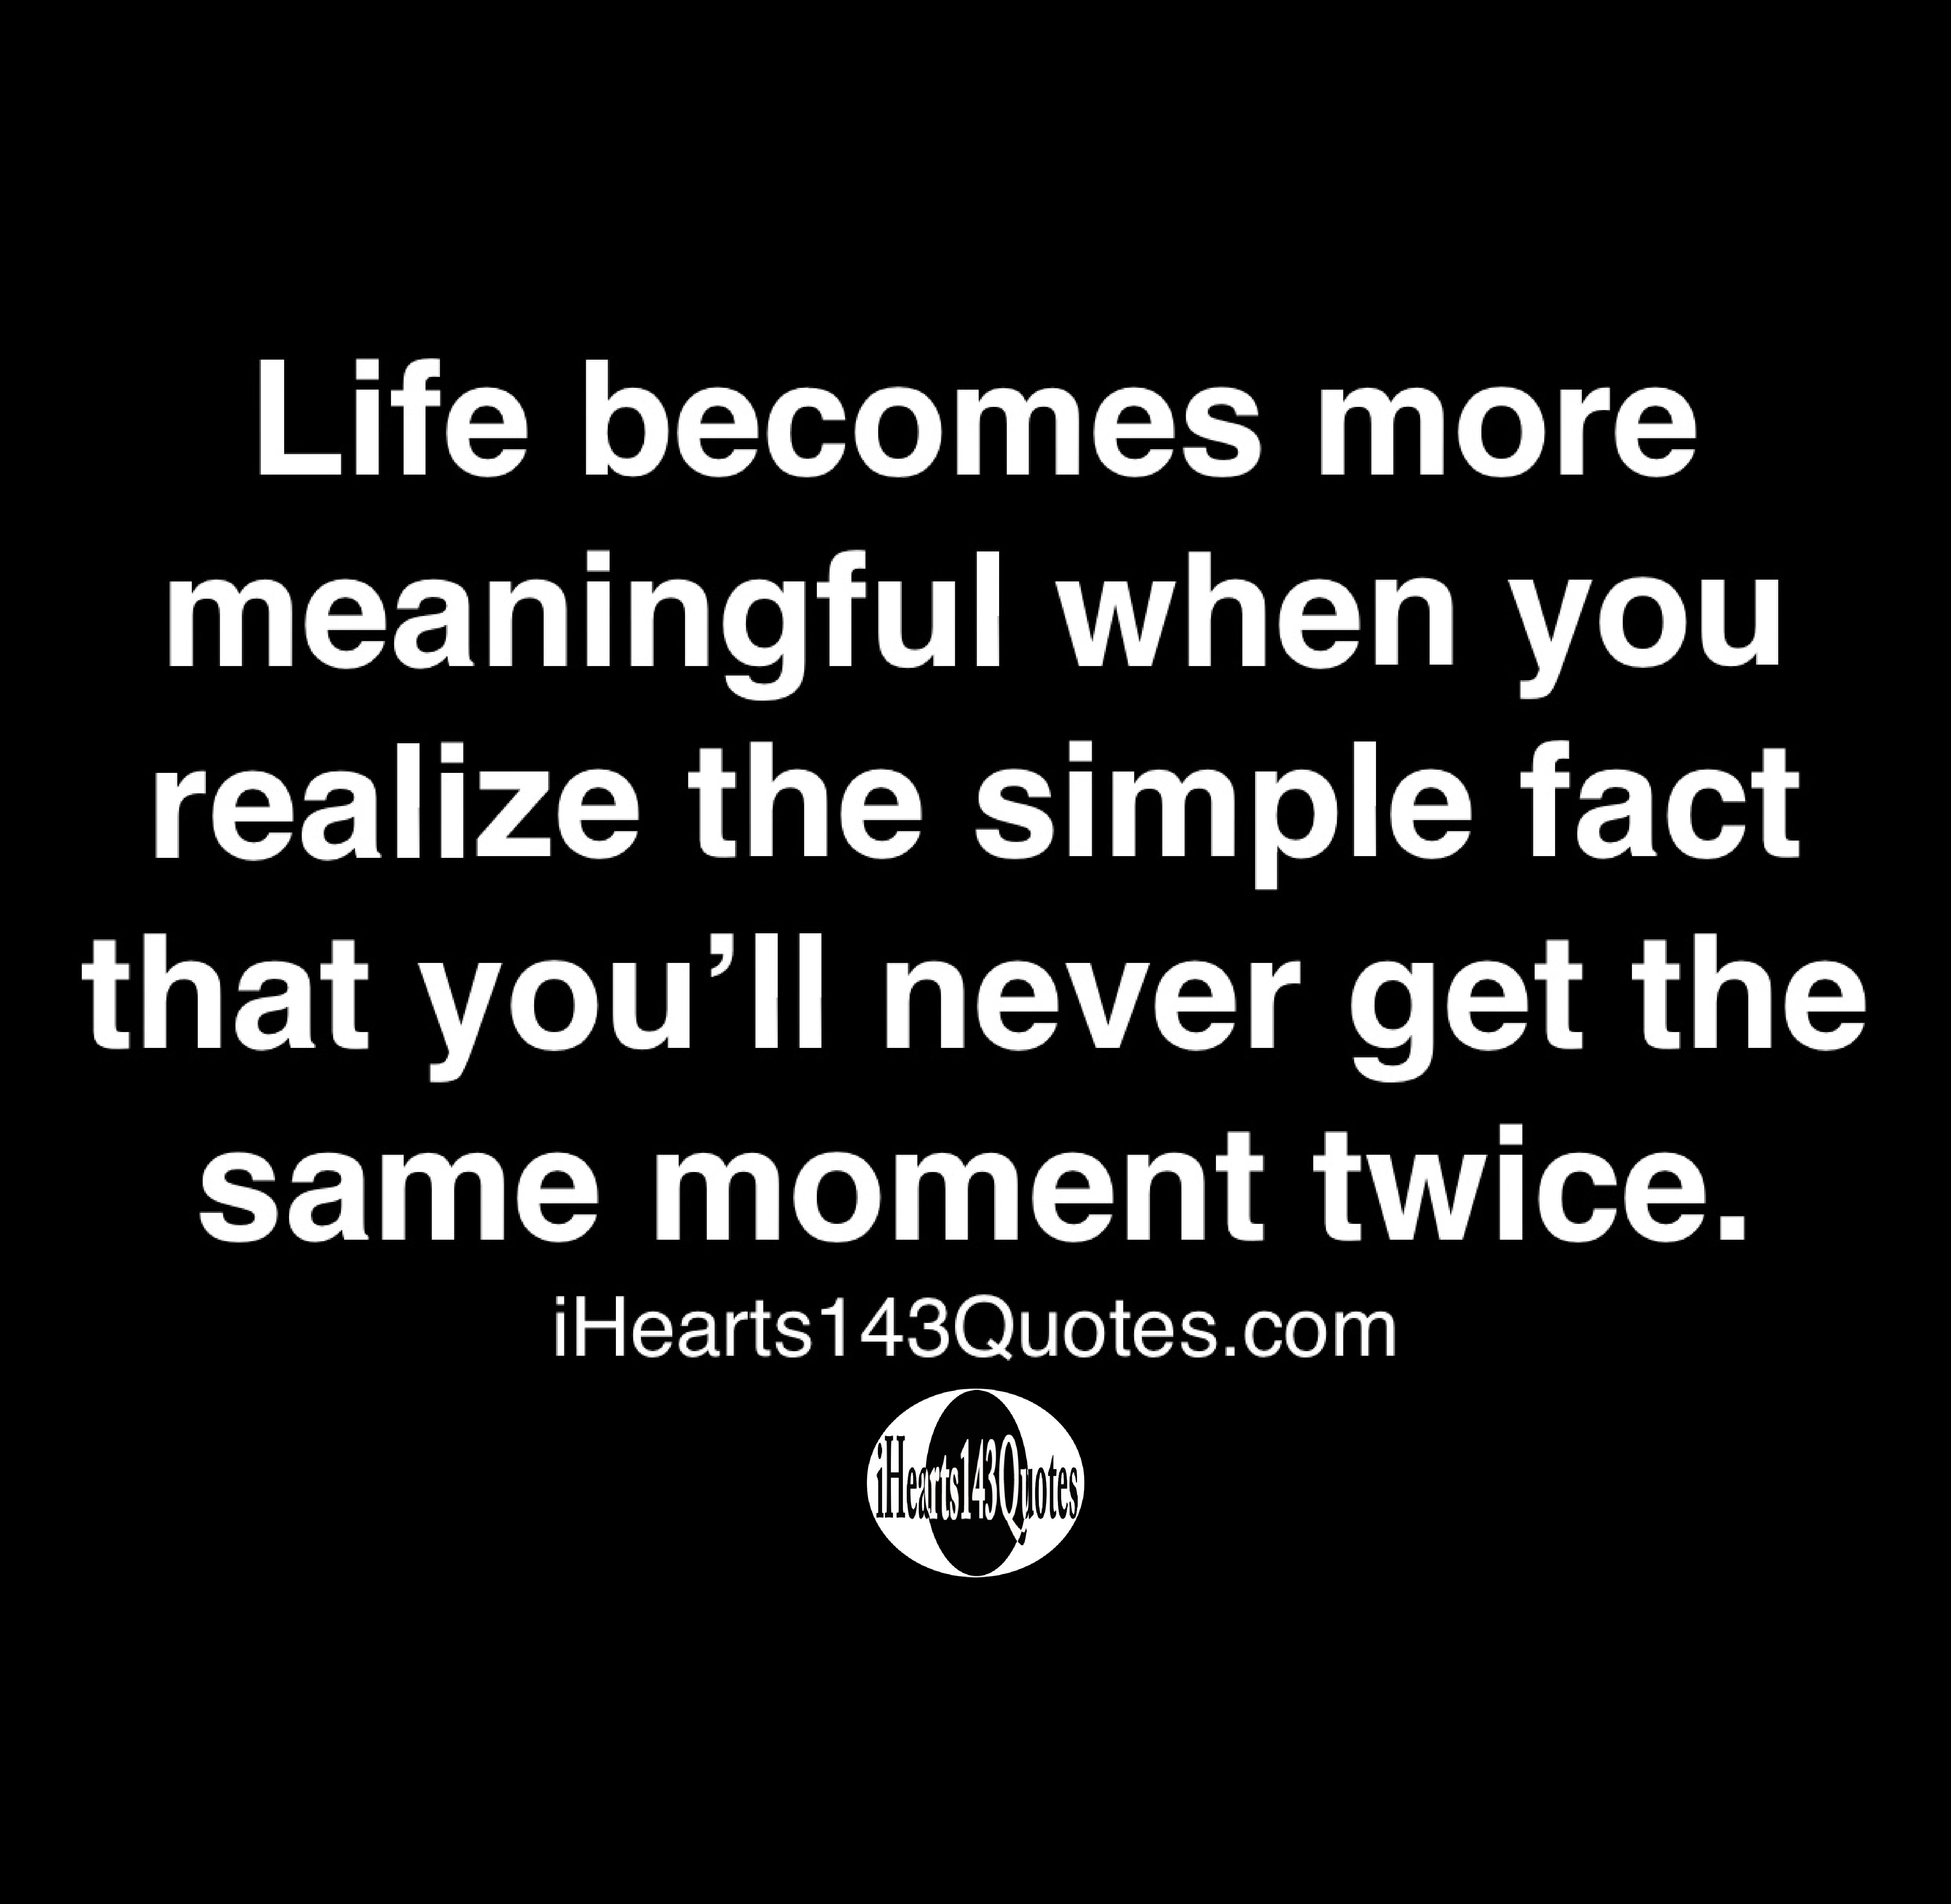 Life becomes more meaningful when you realize the simple fact that you ...